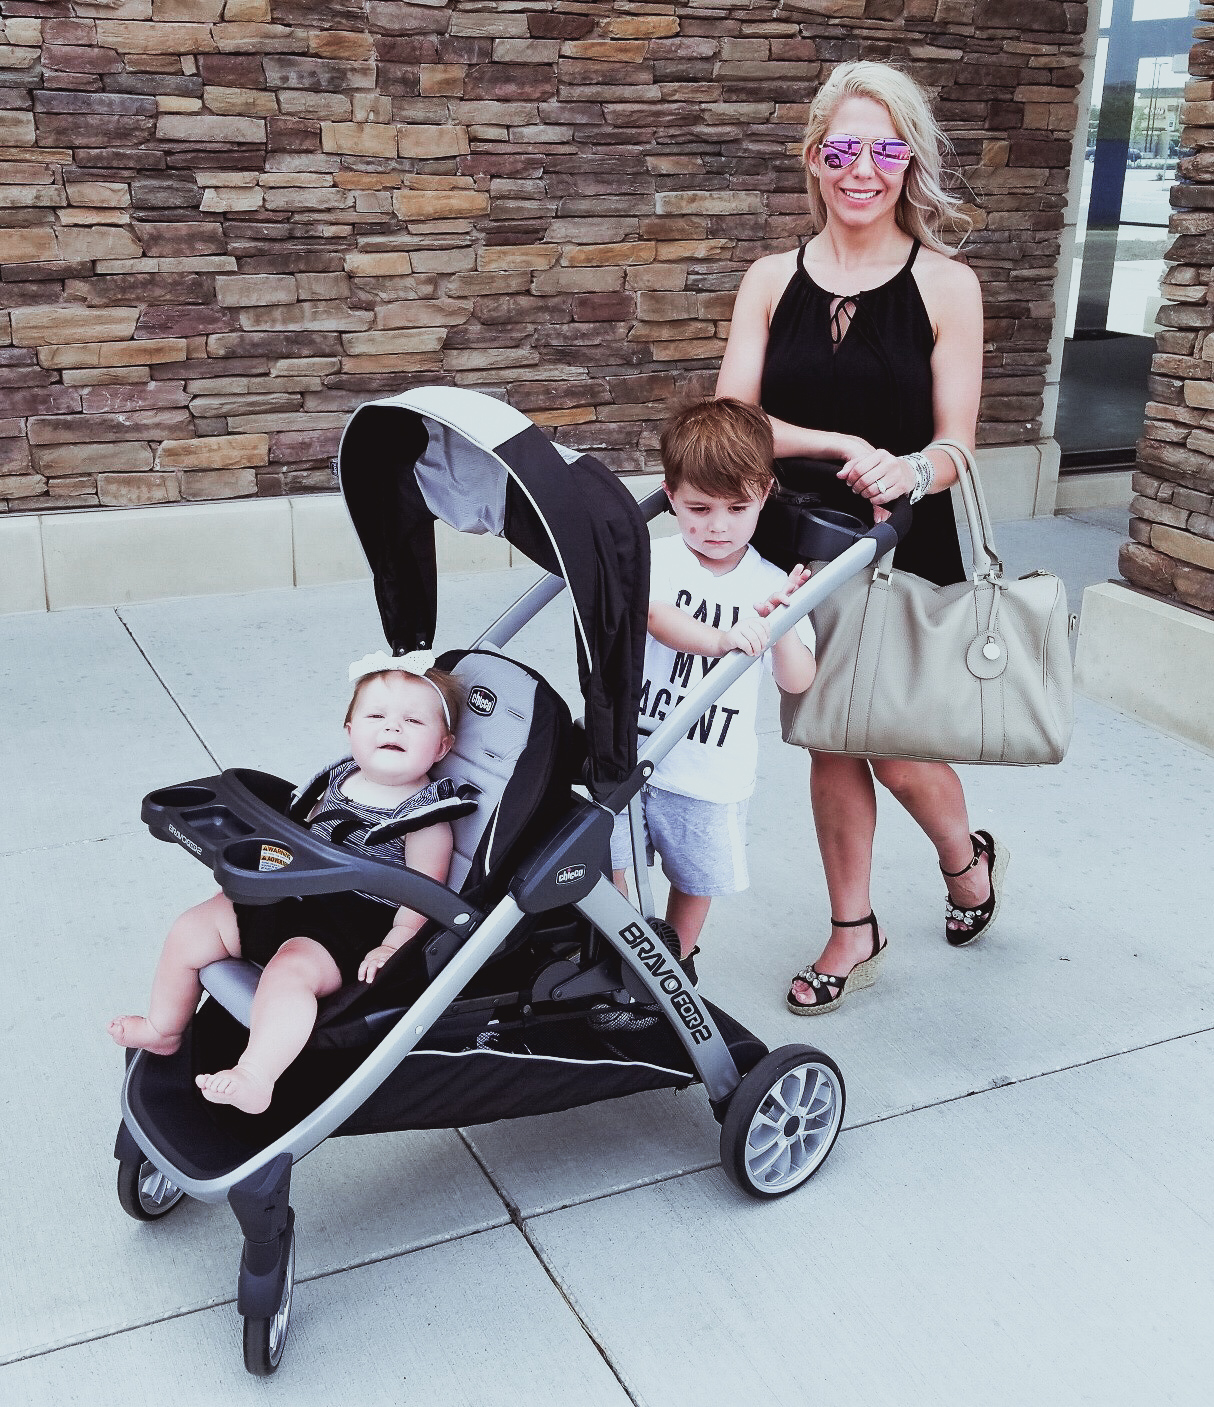 Chicco BravoFor2 Double Stroller Review: Our weekend recap featuring a review of the Chicco BravoFor2 Double Stroller. If you're looking for the best double stroller for 2 kids, you'll want to check out this review. The Chicco Bravo for 2 is a top tandem double stroller and perfect for your family's weekend adventures!